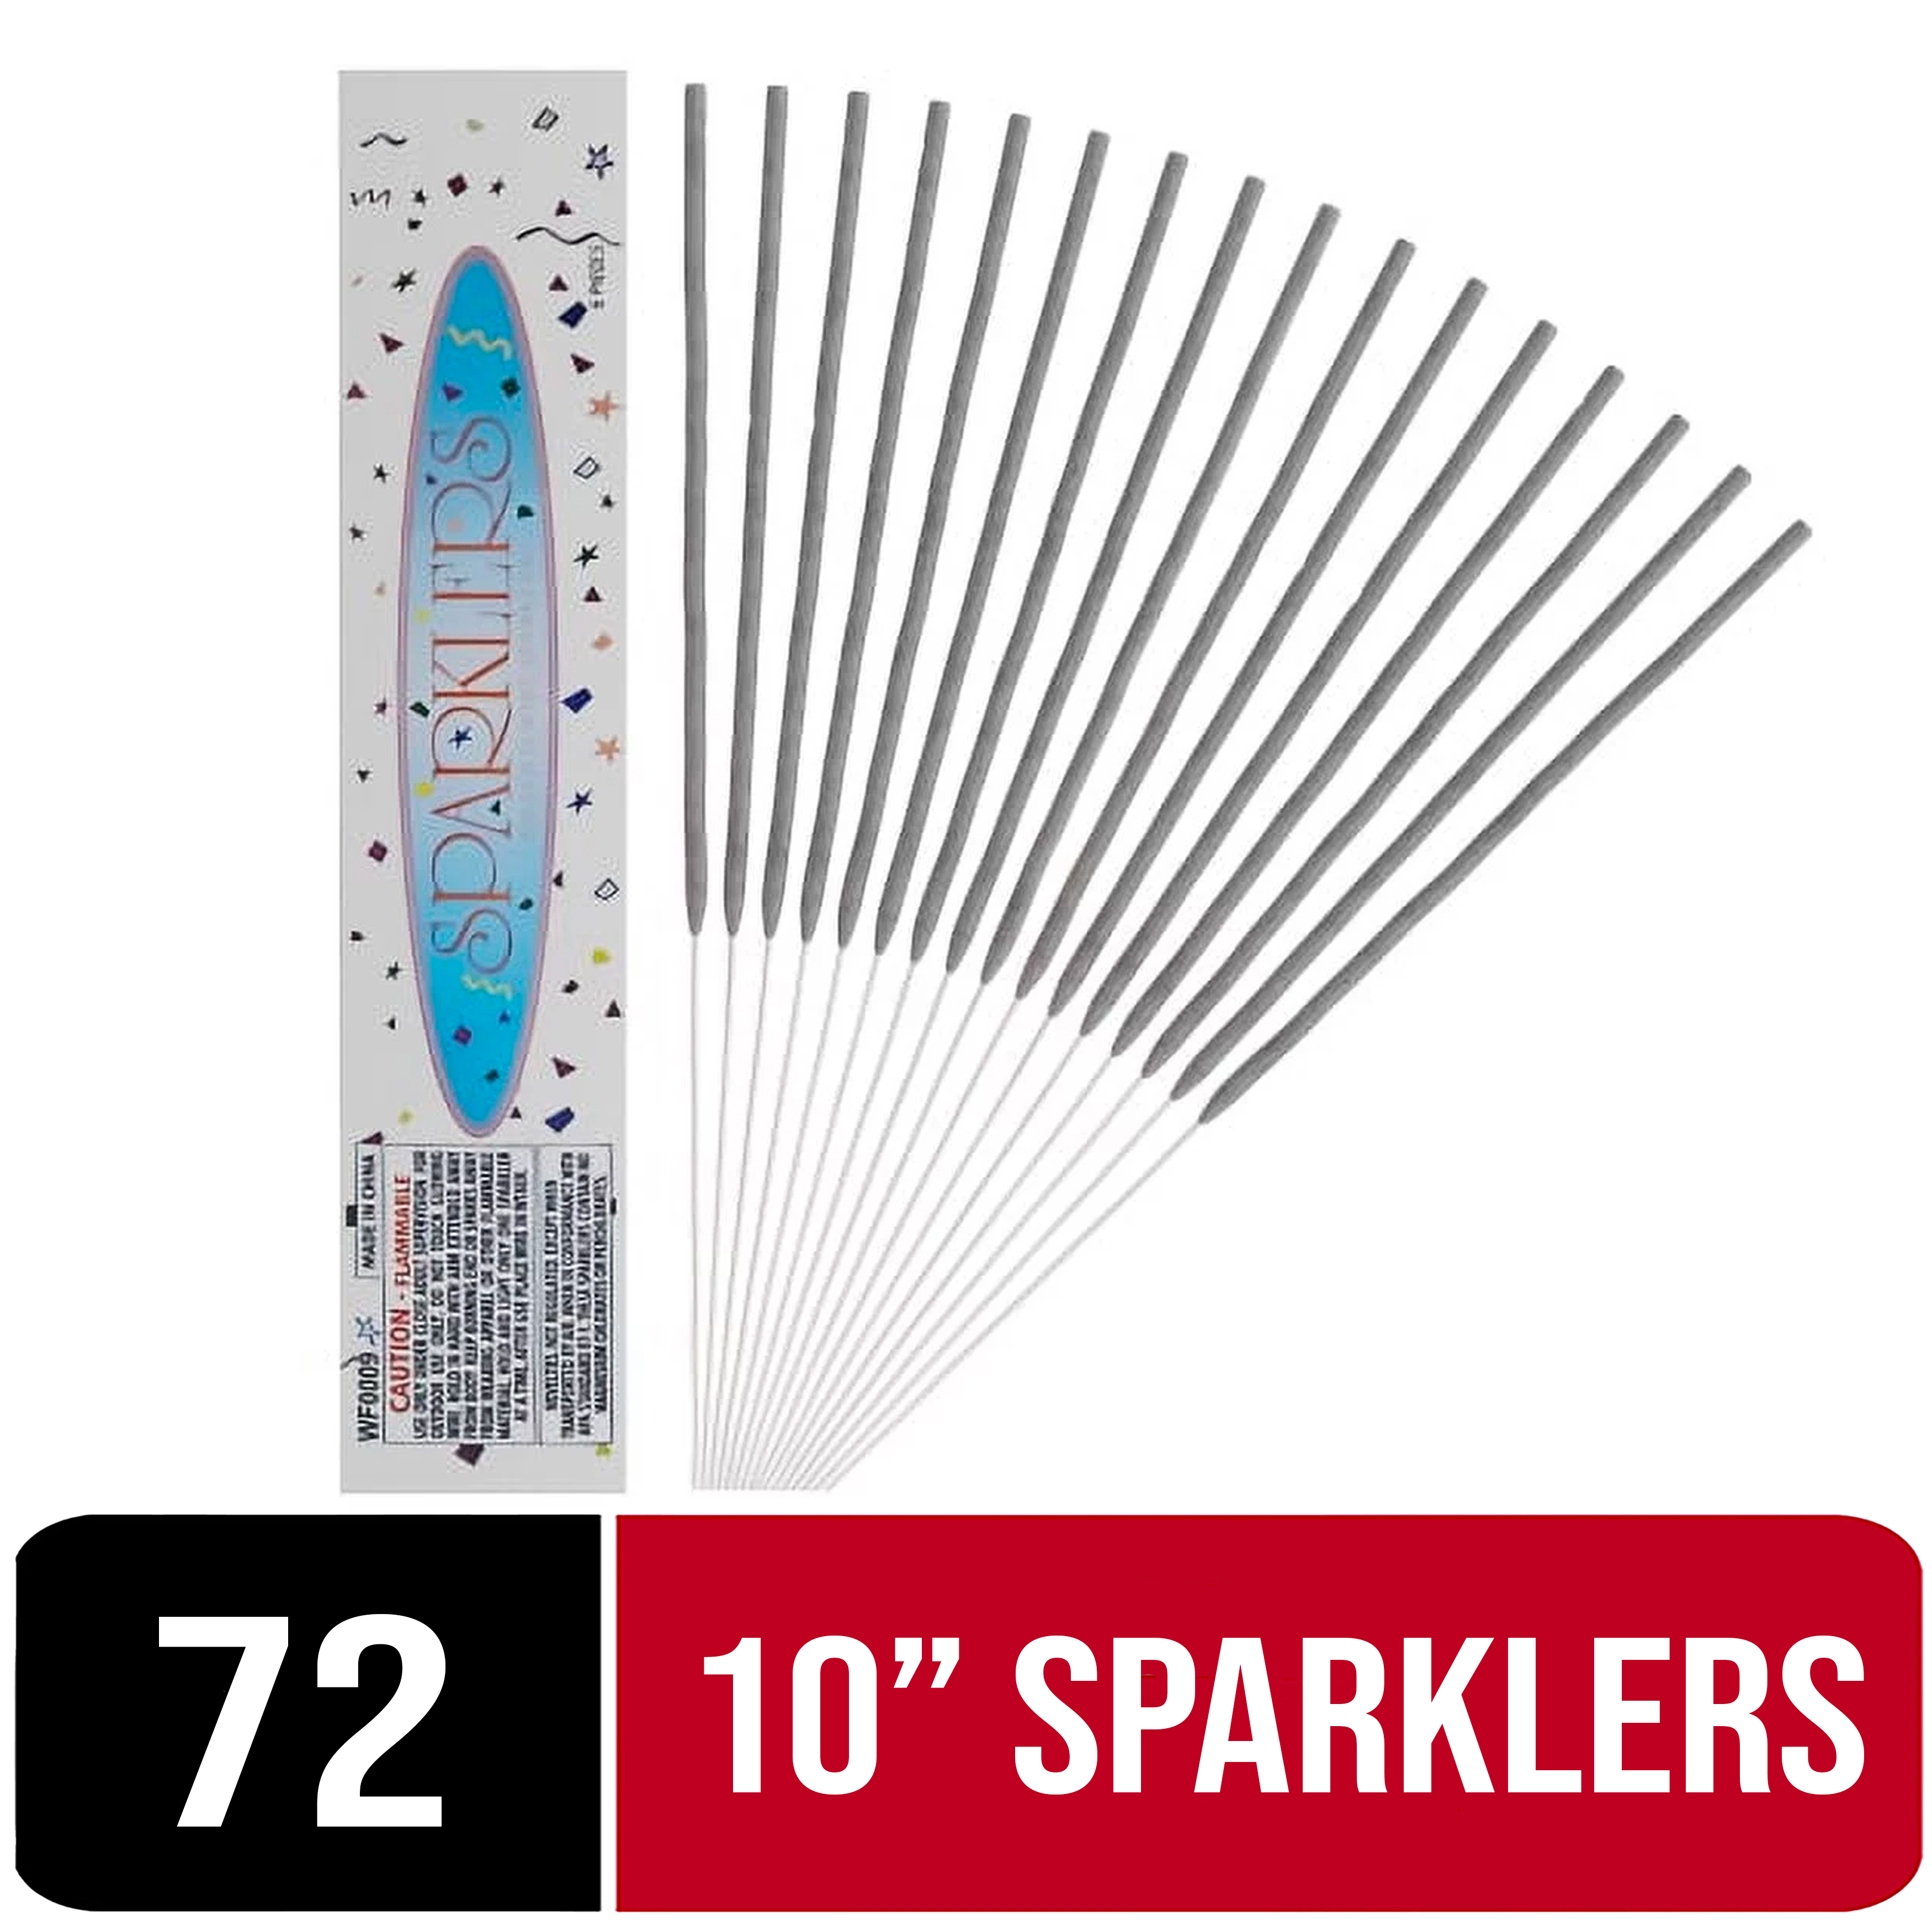 10" Party Sparklers - Ideal for Weddings, Birthdays, Celebrations & More - 72 Count - image 1 of 12